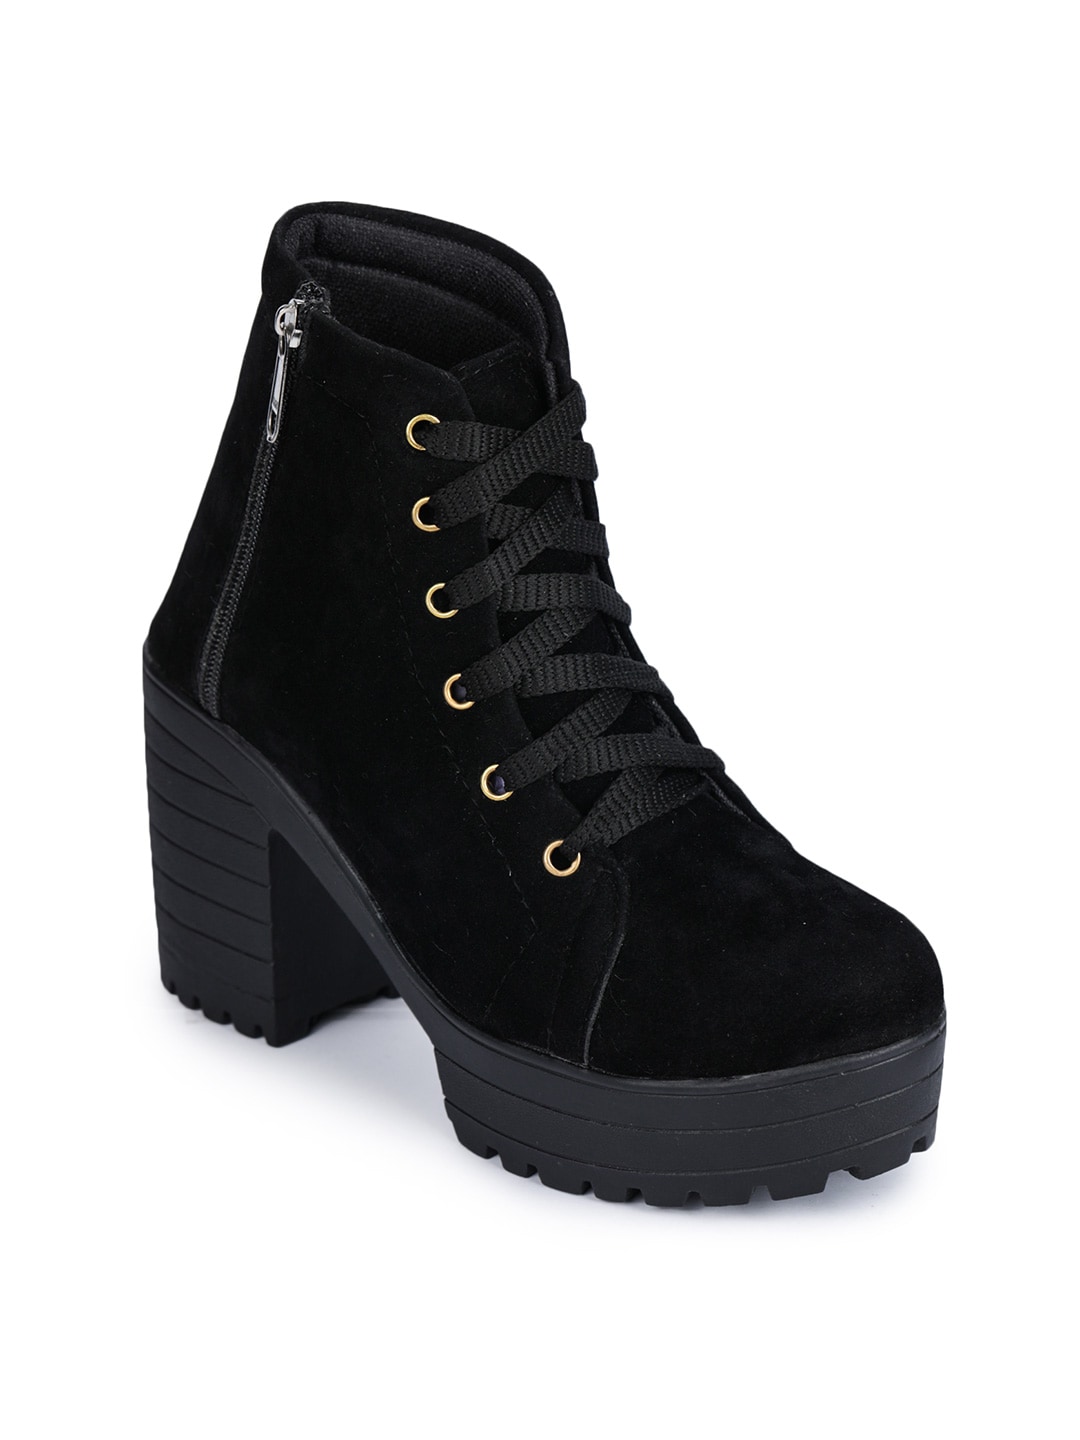 Funku Fashion Women Black Solid Suede Mid-Top Heeled Boots Price in India